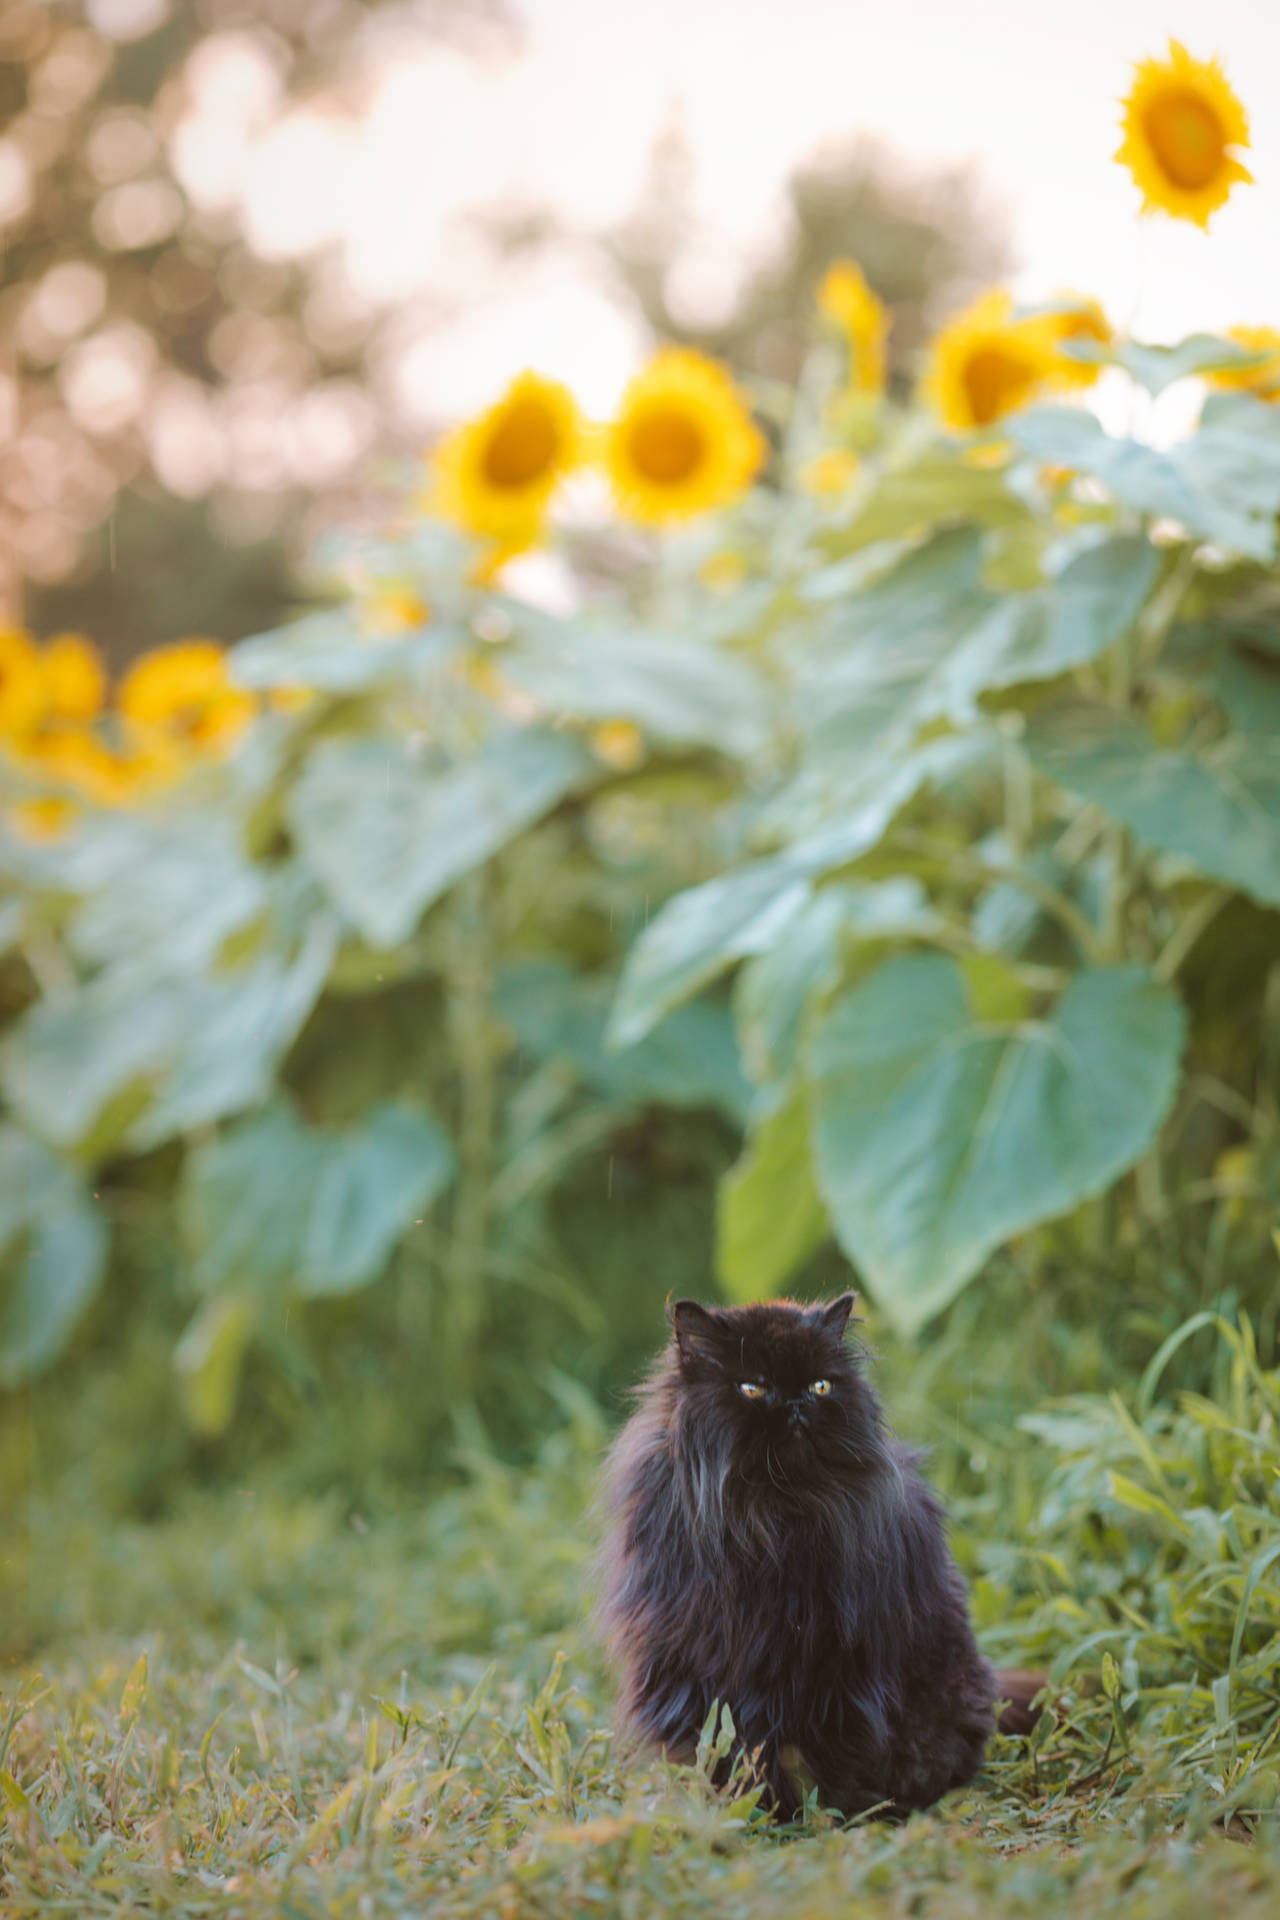 Aesthetic Cat With Sunflowers